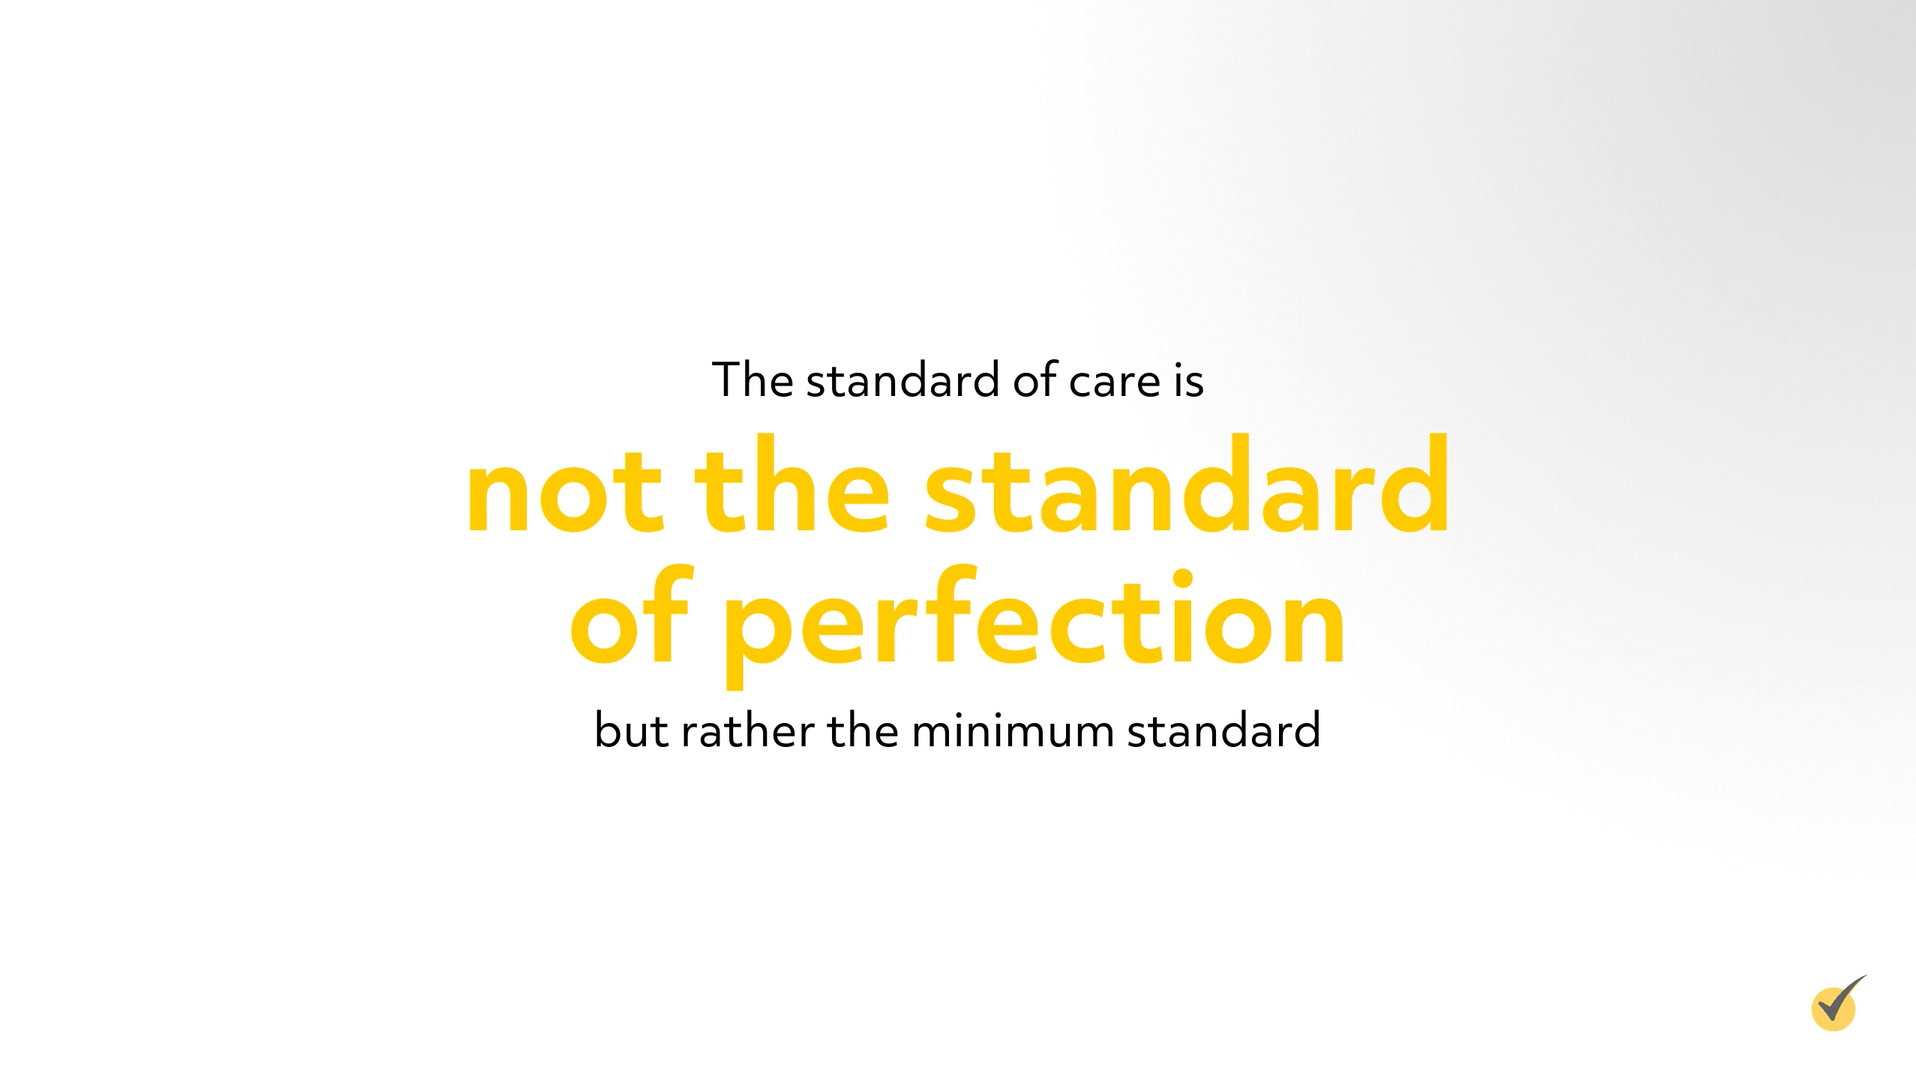 standard of care is the minimum